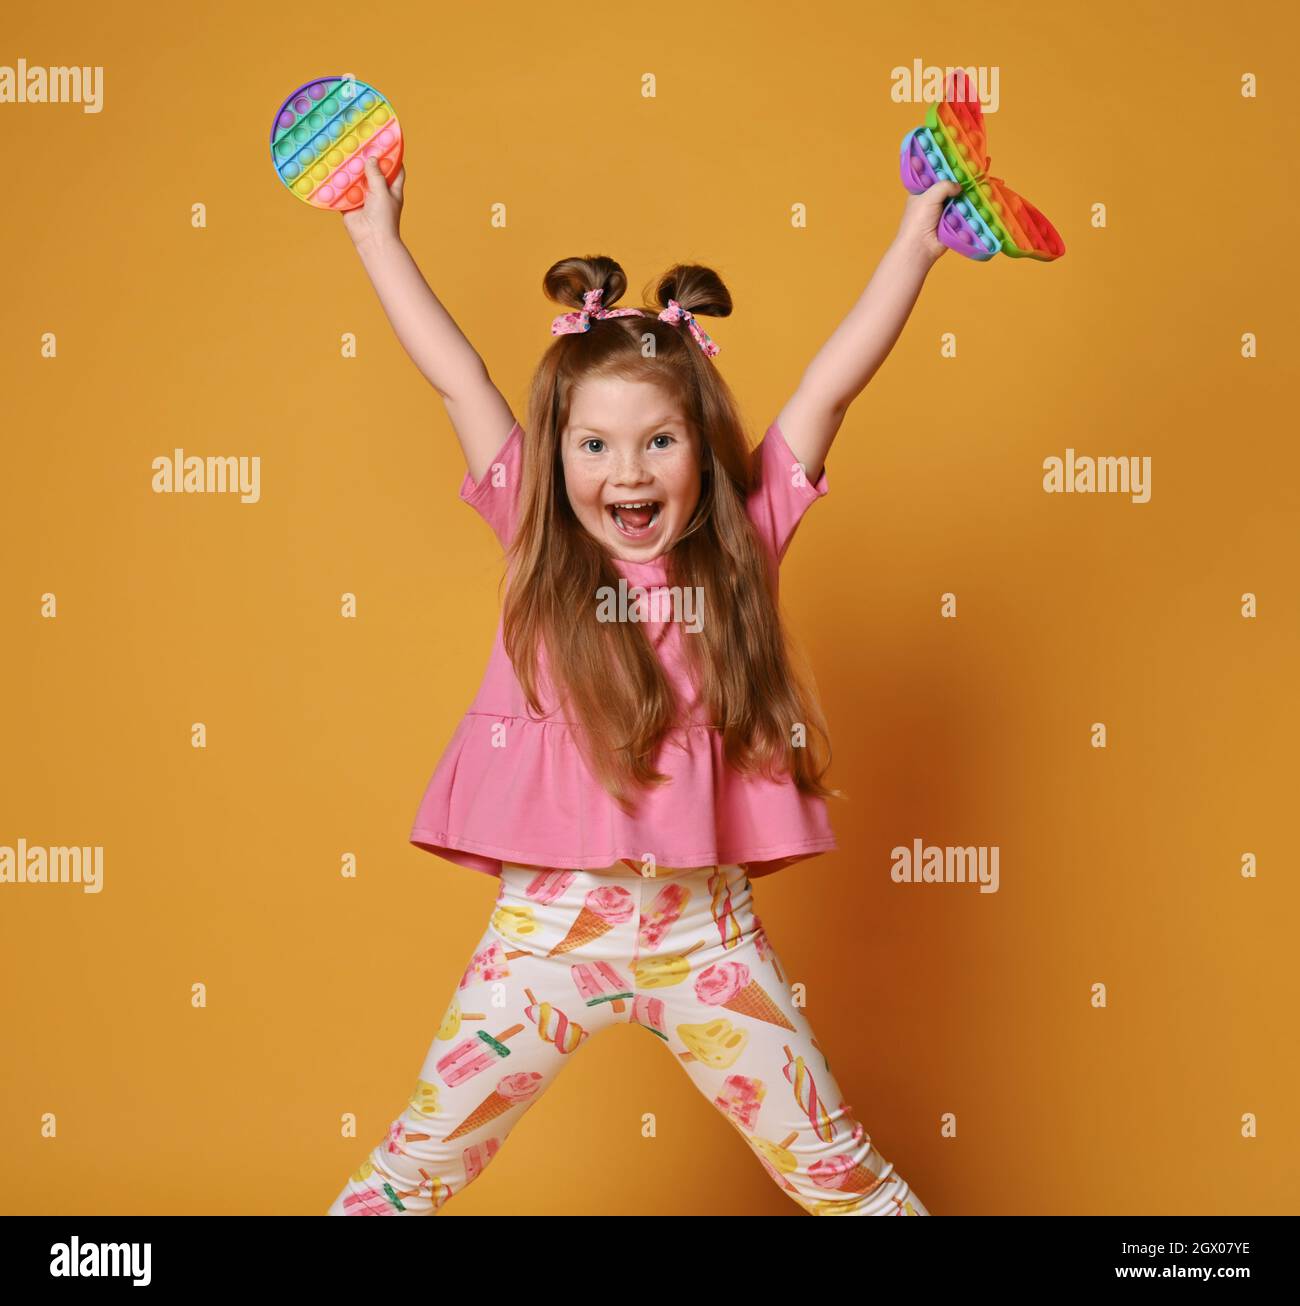 Kid girl in colorful clothes stands with legs wide apart, holds two sensory rainbow color toys - pop it up and screams Stock Photo